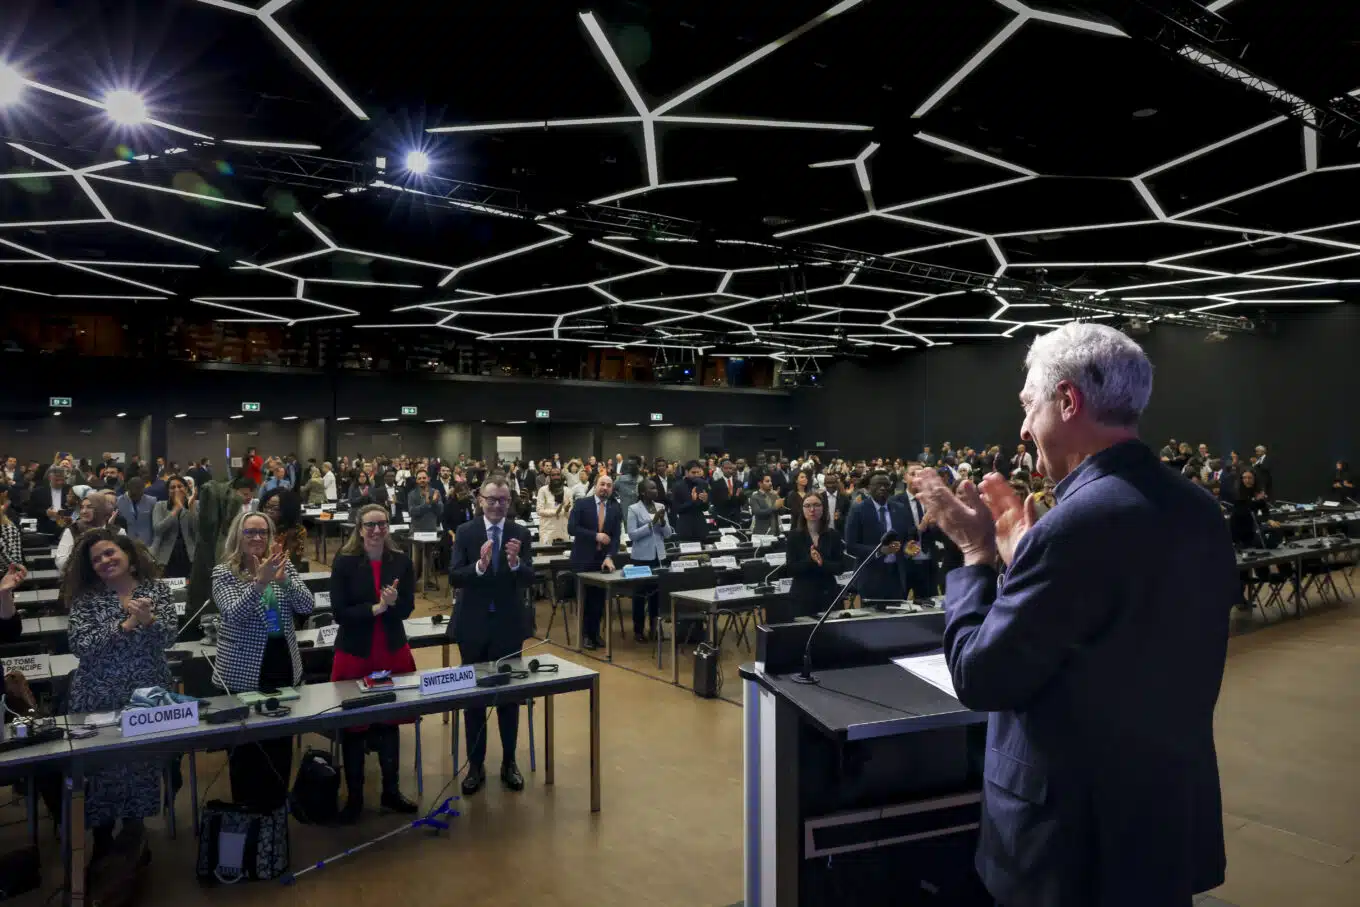 UN High Commissioner for Refugees Filippo Grandi stands in front of a podium, clapping, in a room with a black geographic cieling an audience of world leaders. 